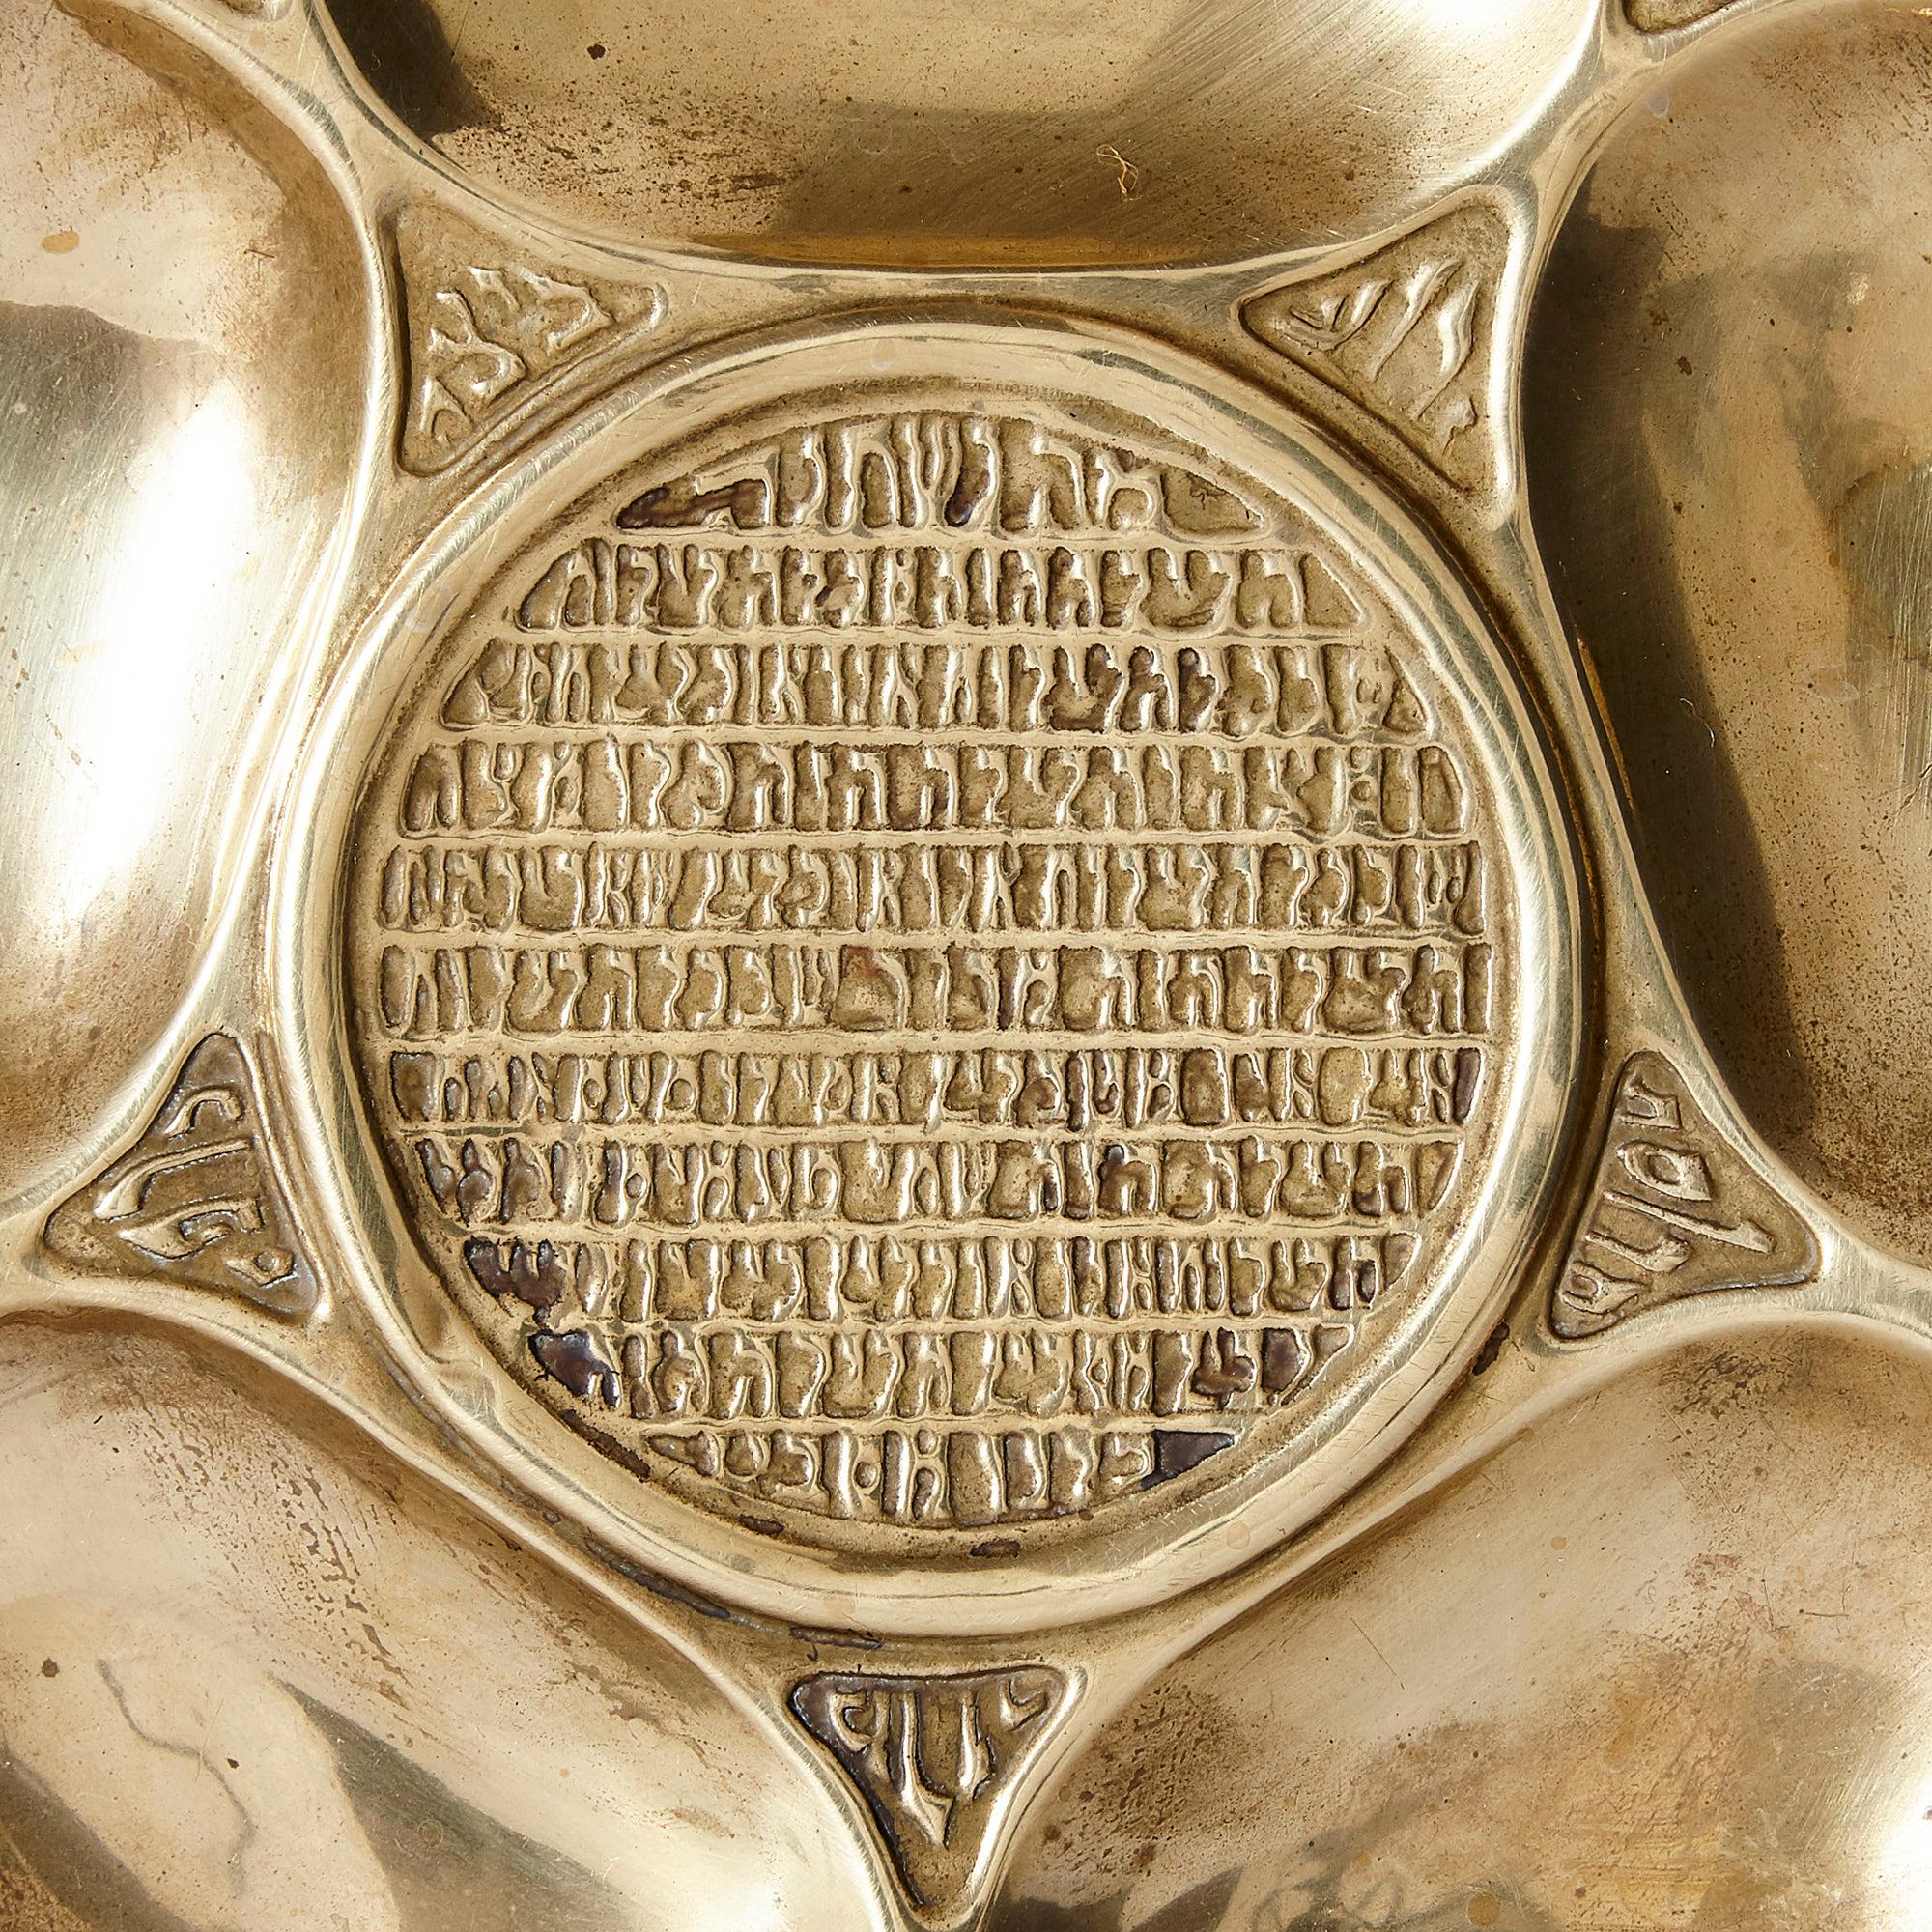 Antique Jewish Brass Seder Plate by Bezalel Academy of Arts and Design
Jerusalem, early 20th century
Dimensions: Height 1cm, diameter 32cm

This circular brass plate is a beautiful antique Seder plate for the Jewish holiday of Passover, produced